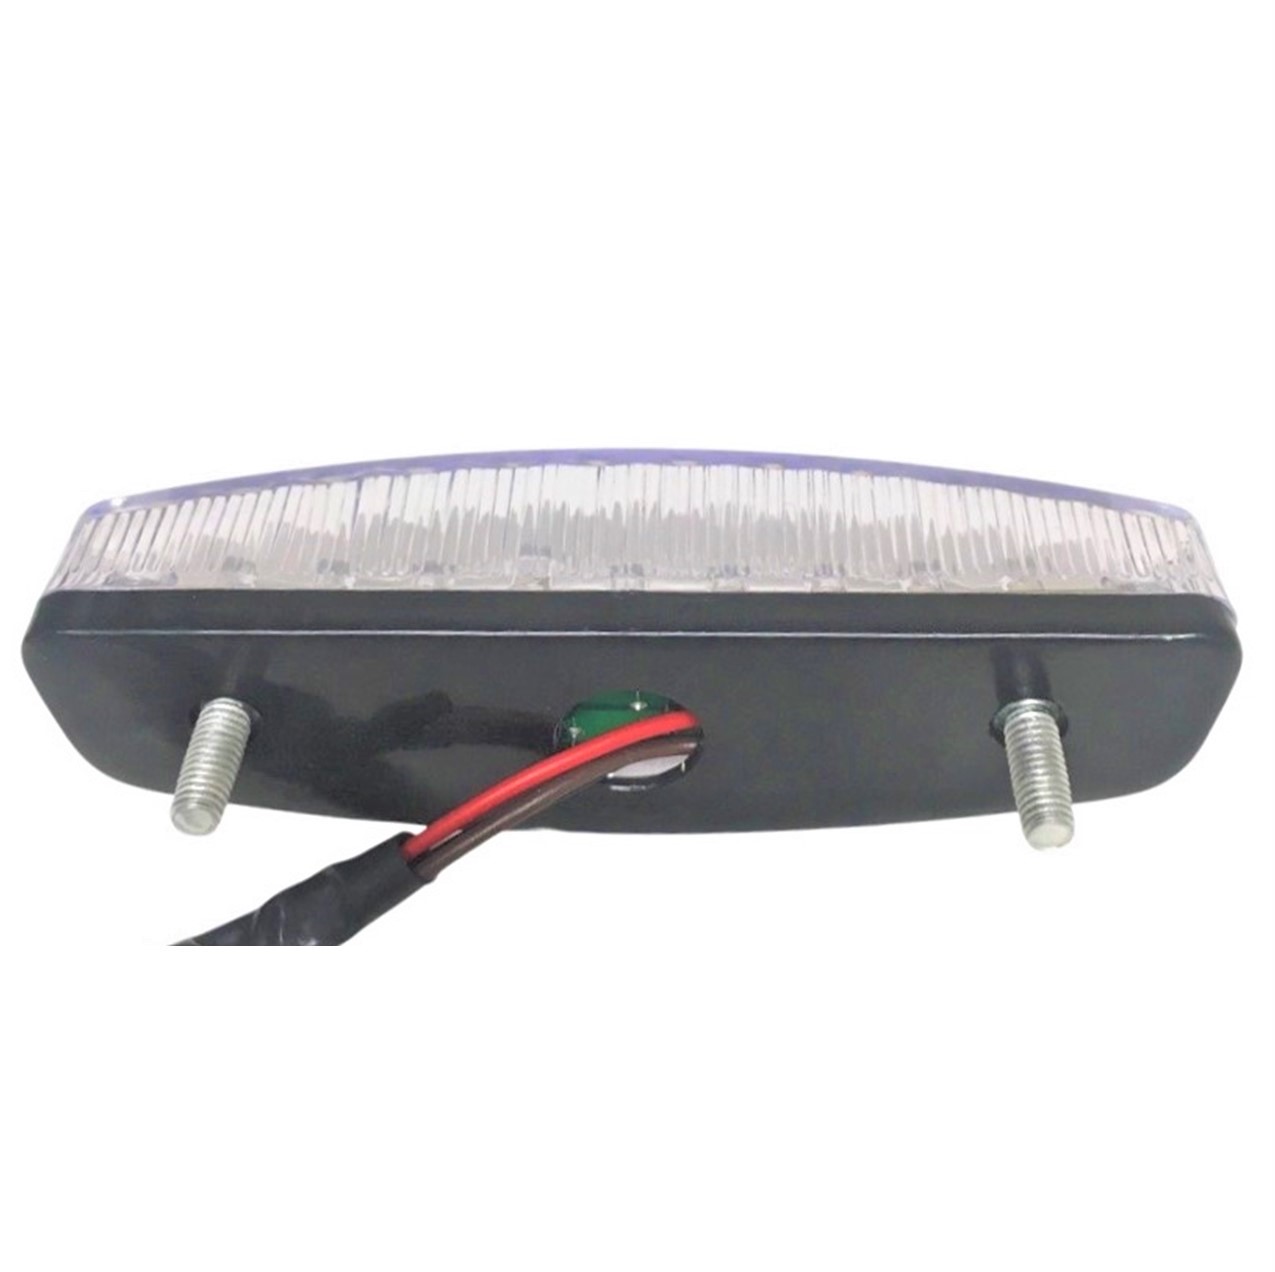 Rear Tail Light Fits Many ATV's, DirtBikes, and GoKarts W=5 H=1.5 3Pins in a 3 Pin Male Jack